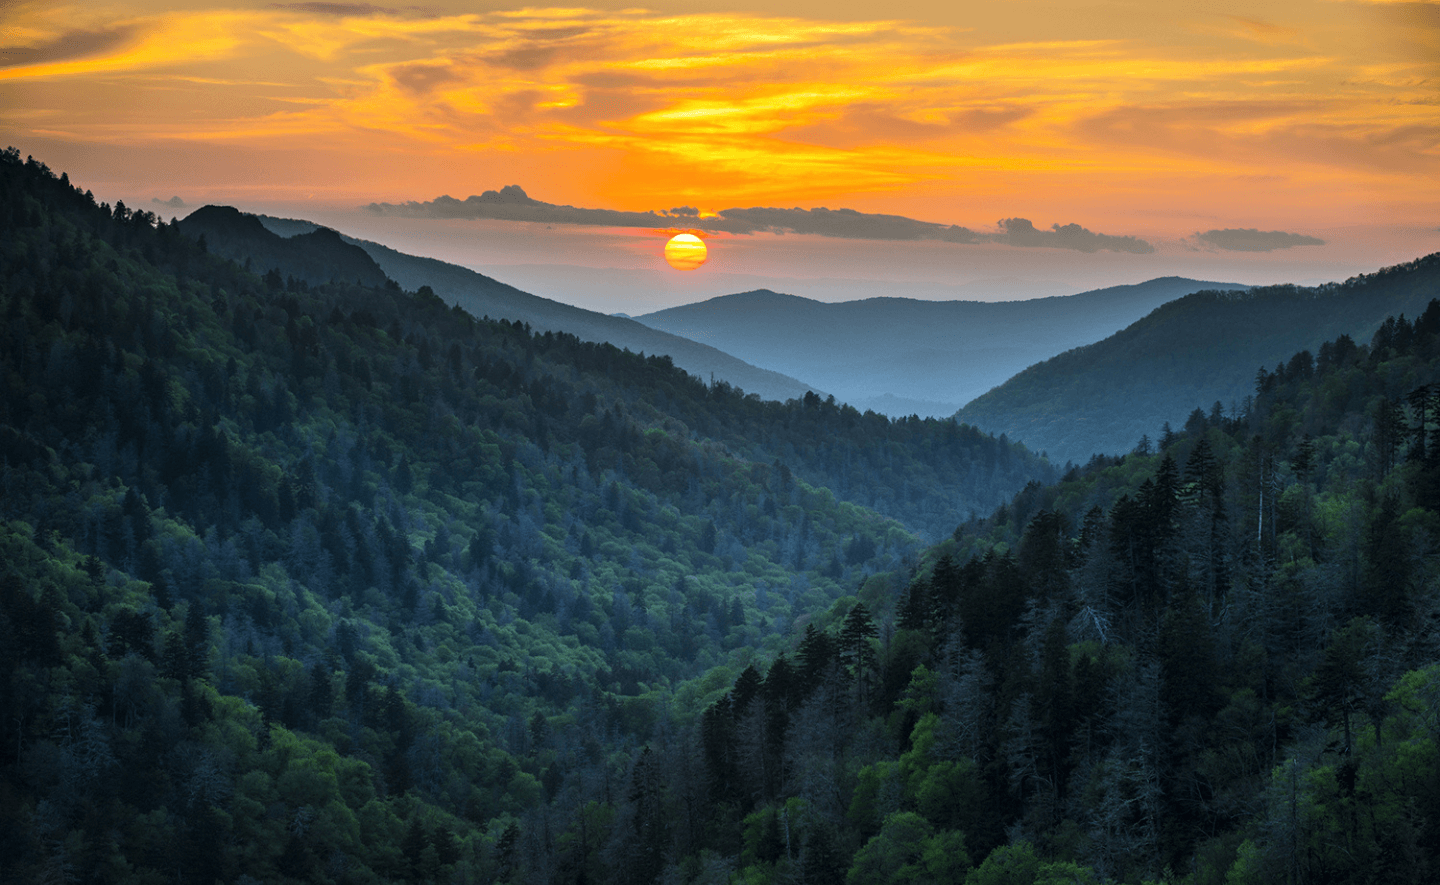 Great Smoky Mountains National Park at sunrise